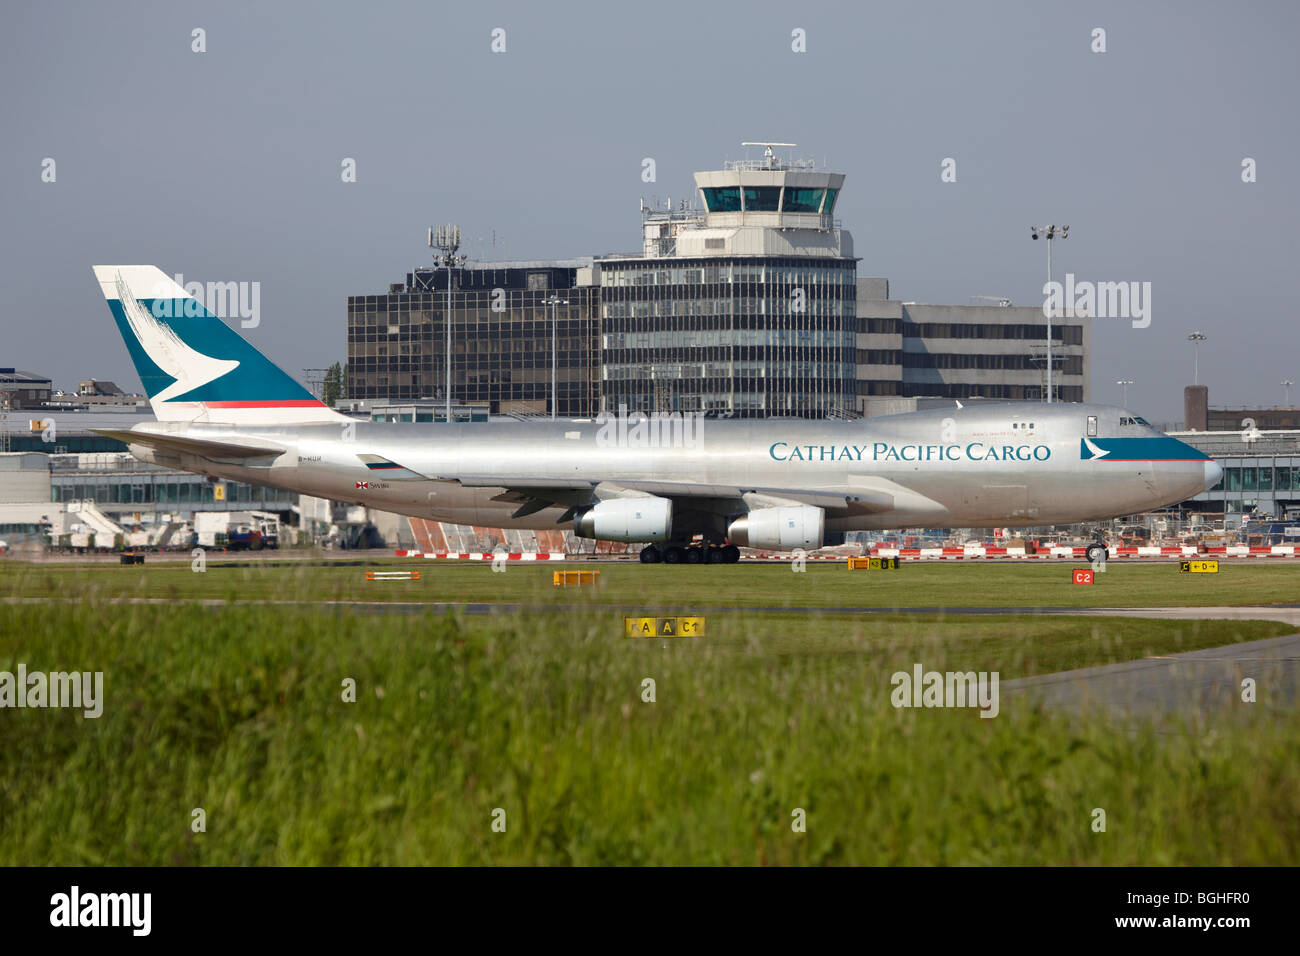 Cathay Pacific Stock Photo